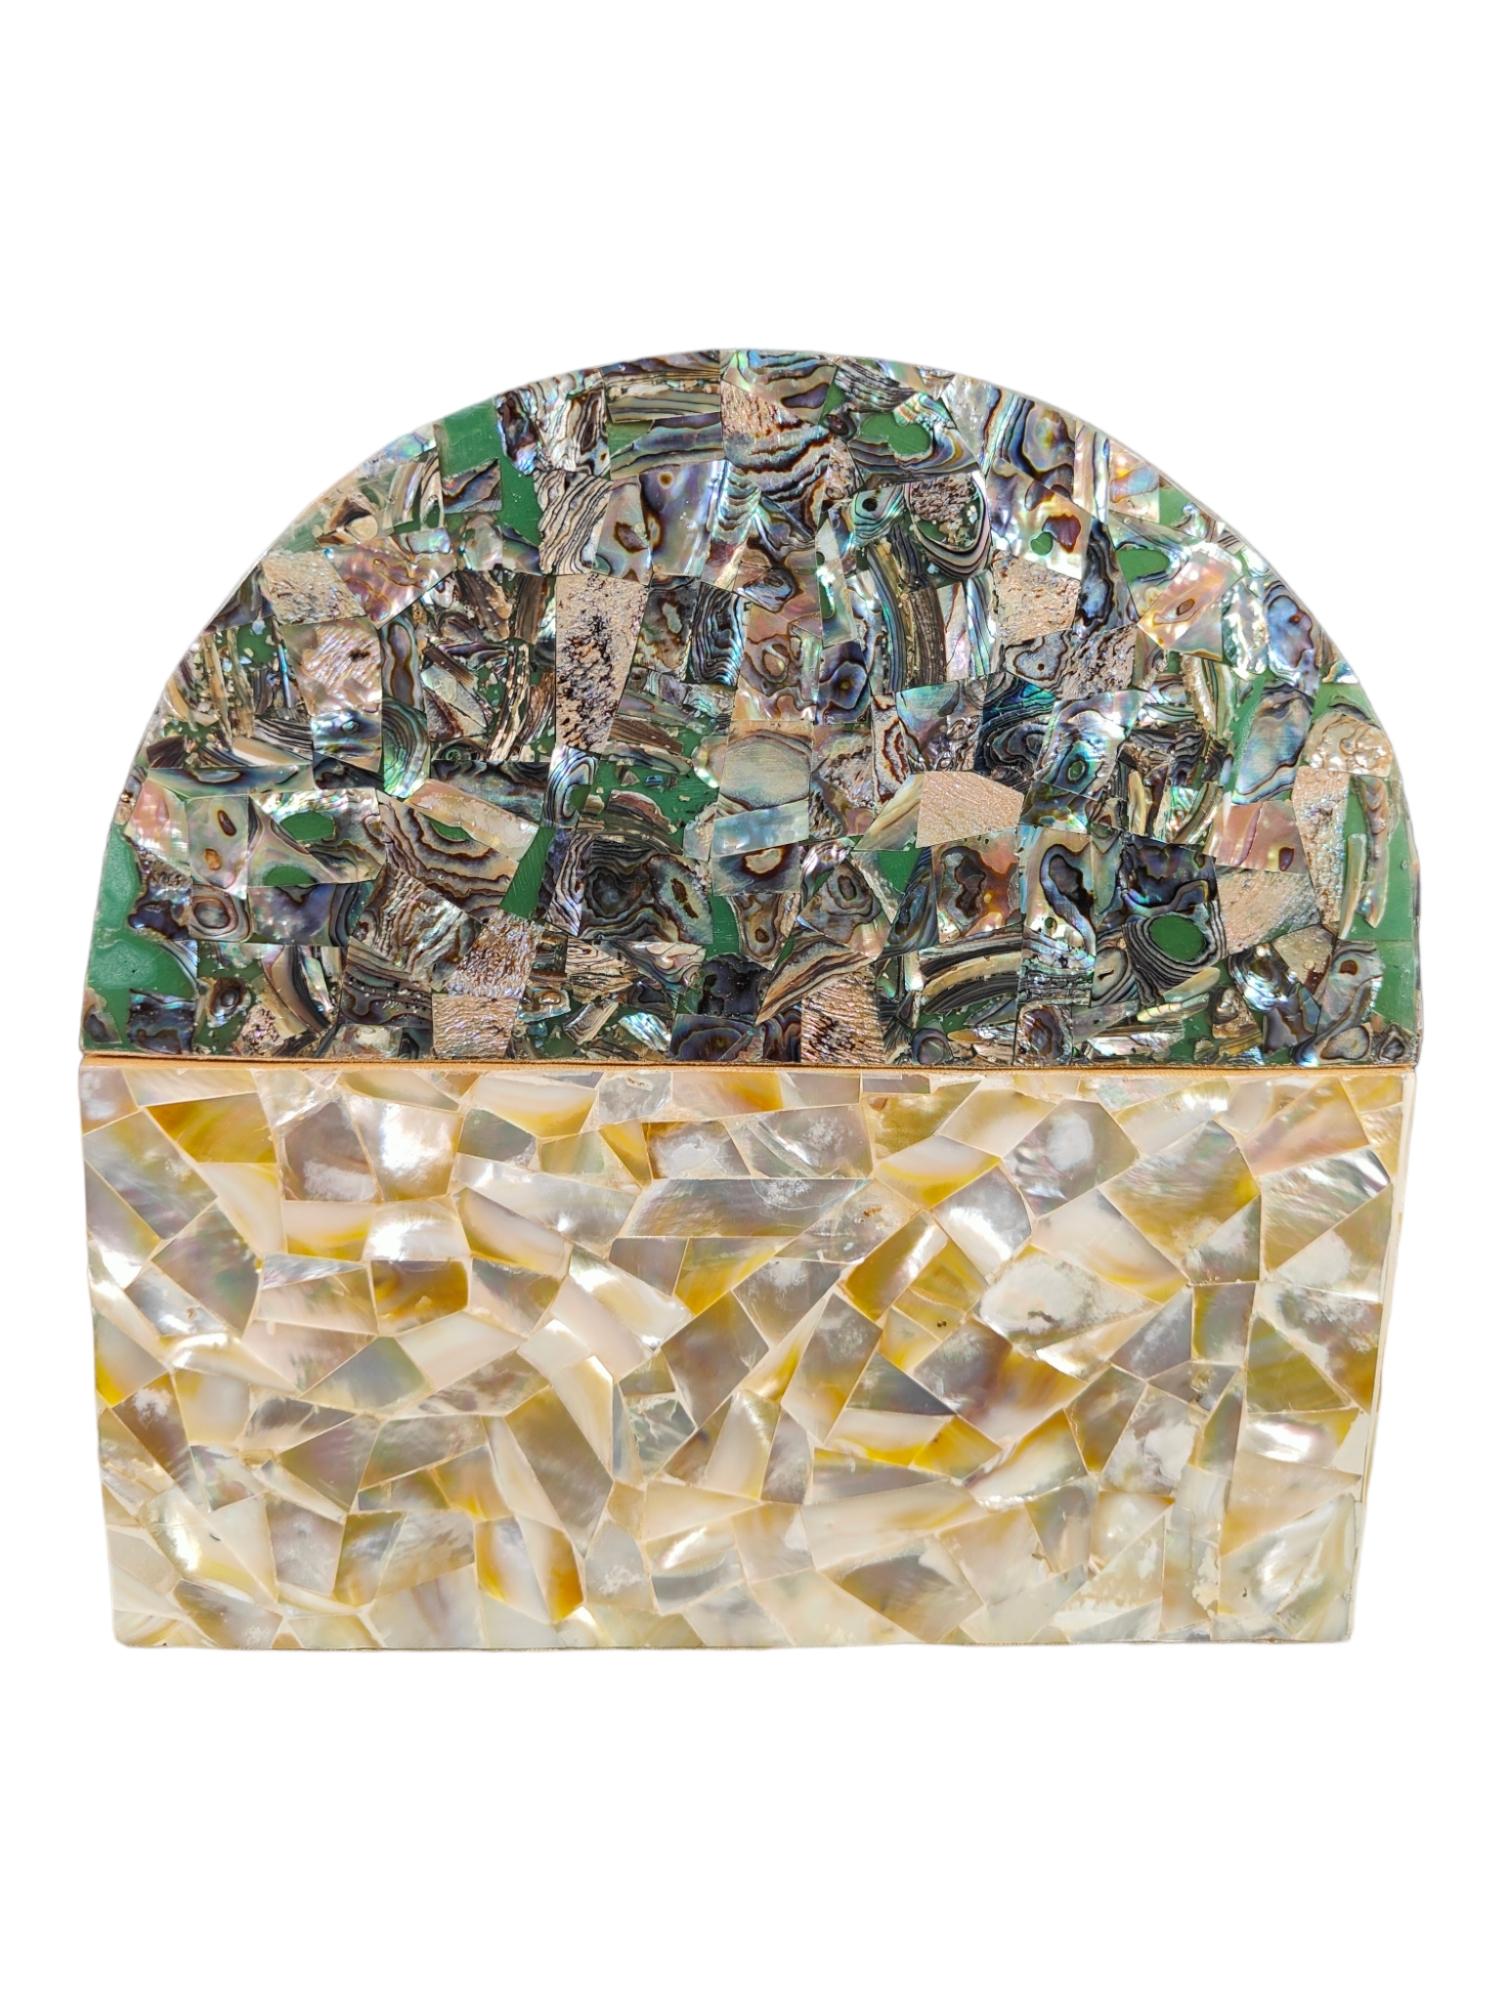 Mid-20th Century Mother of Pearl Box For Sale 2